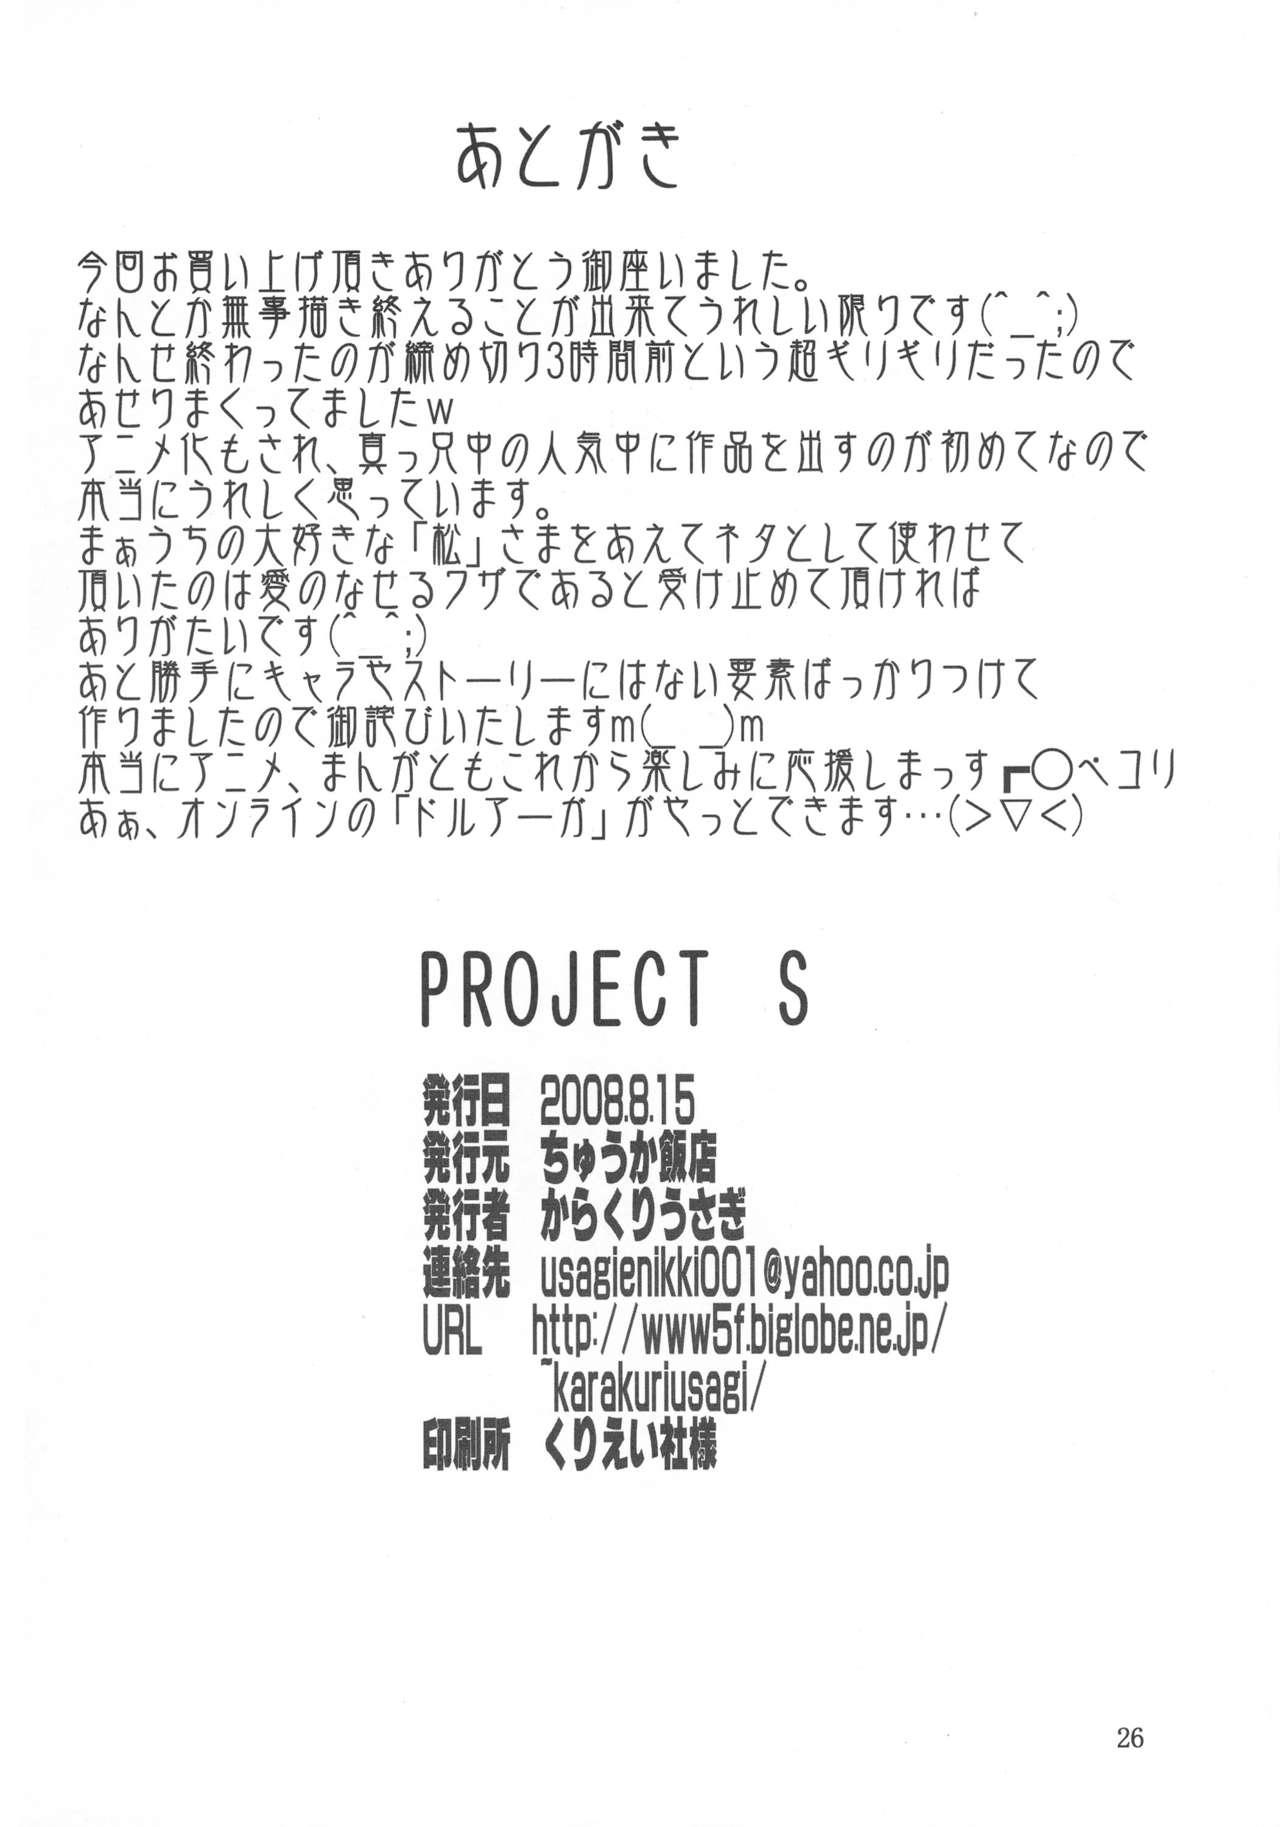 PROJECT S 26